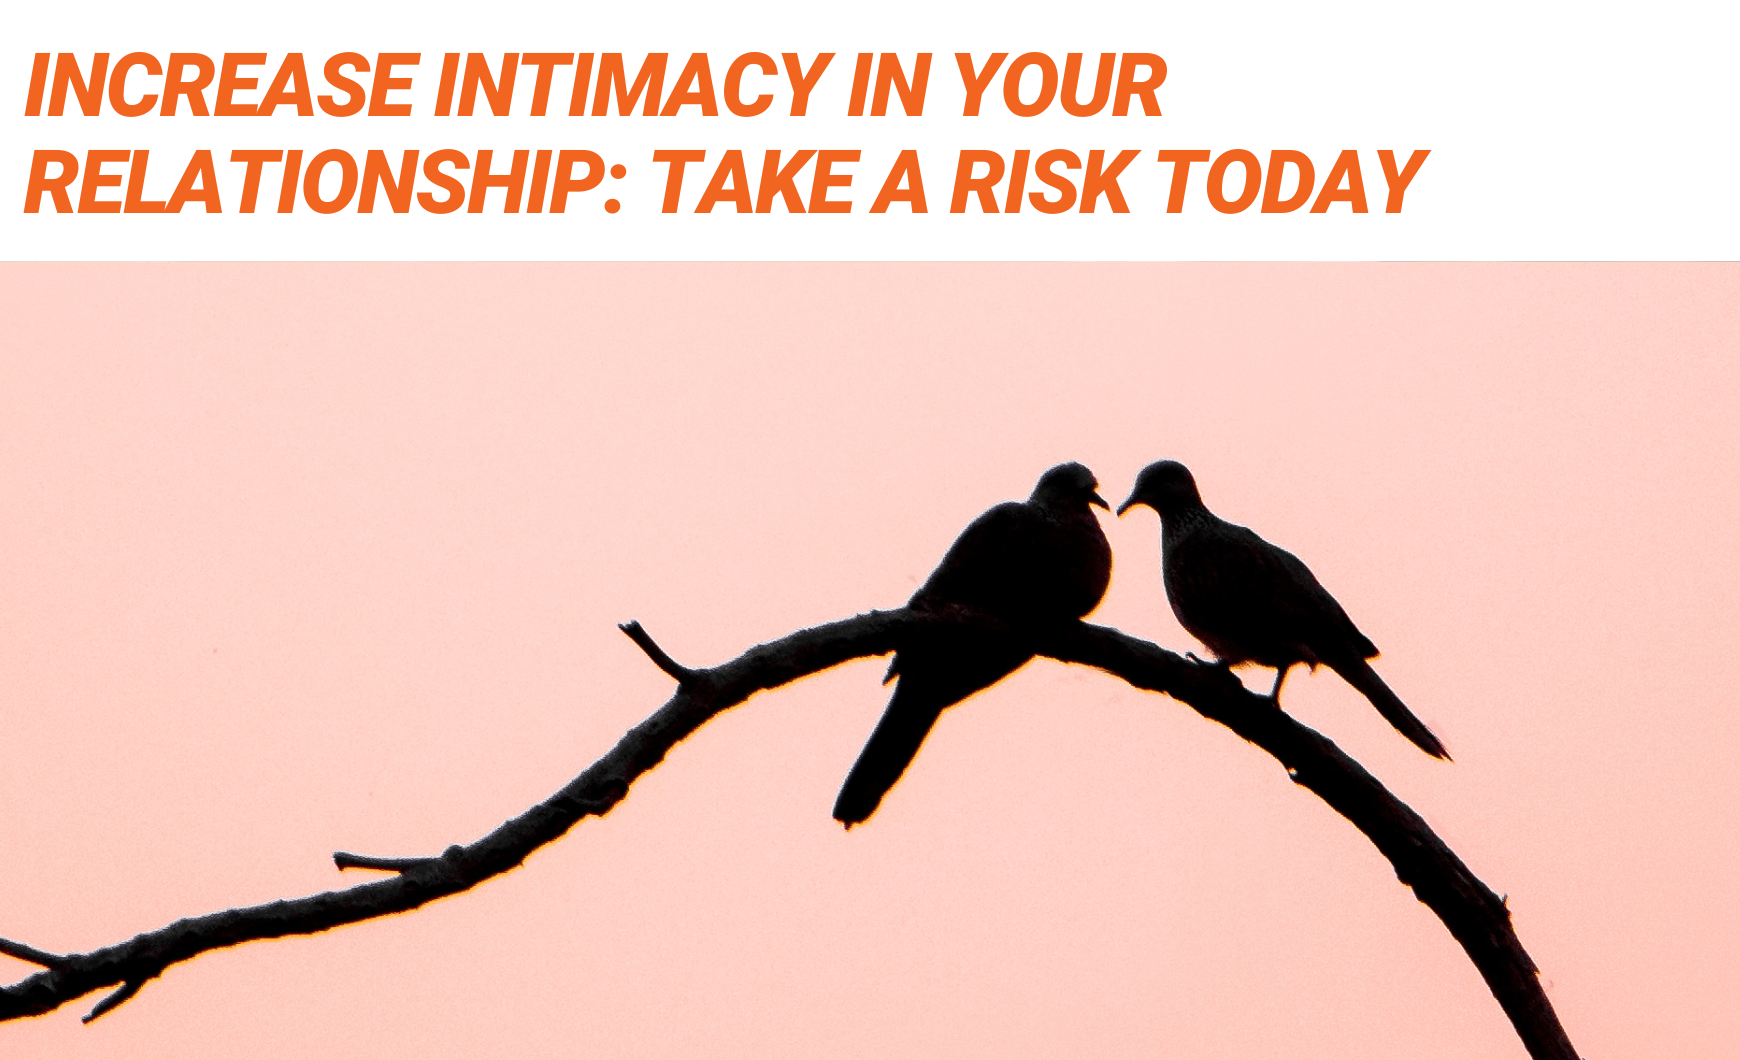 Orange text on a white background that reads "Increase Intimacy in your Relationship: Take a Risk Today" above a photo of two birds on a branch. We can see their silhouette against a pink sky.